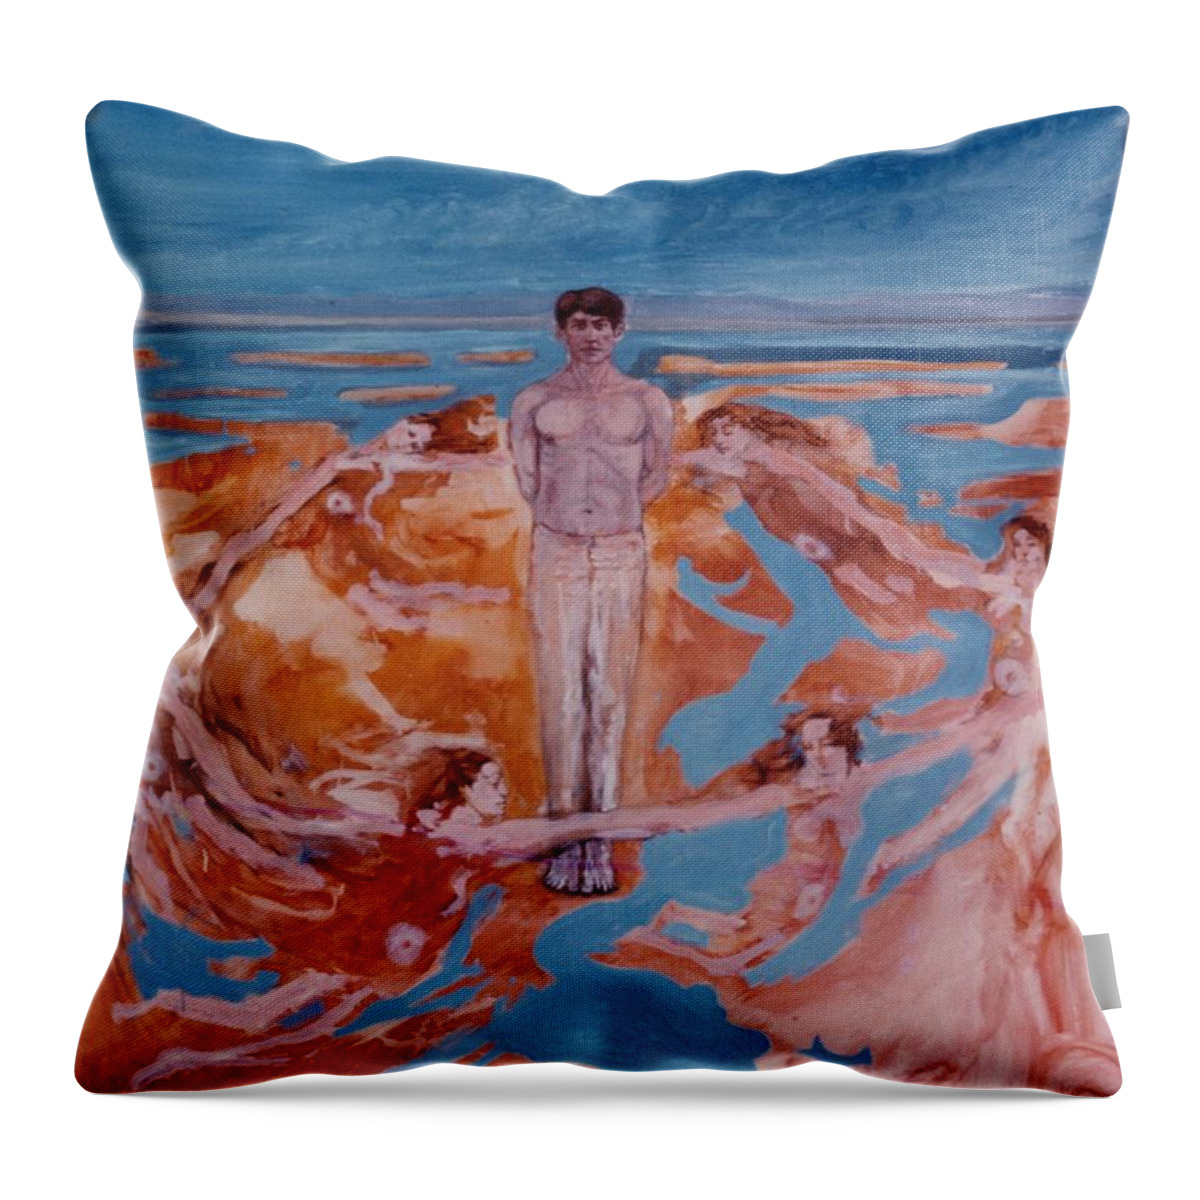 Allegorical Throw Pillow featuring the painting Me And The Furies by Scott Cumming